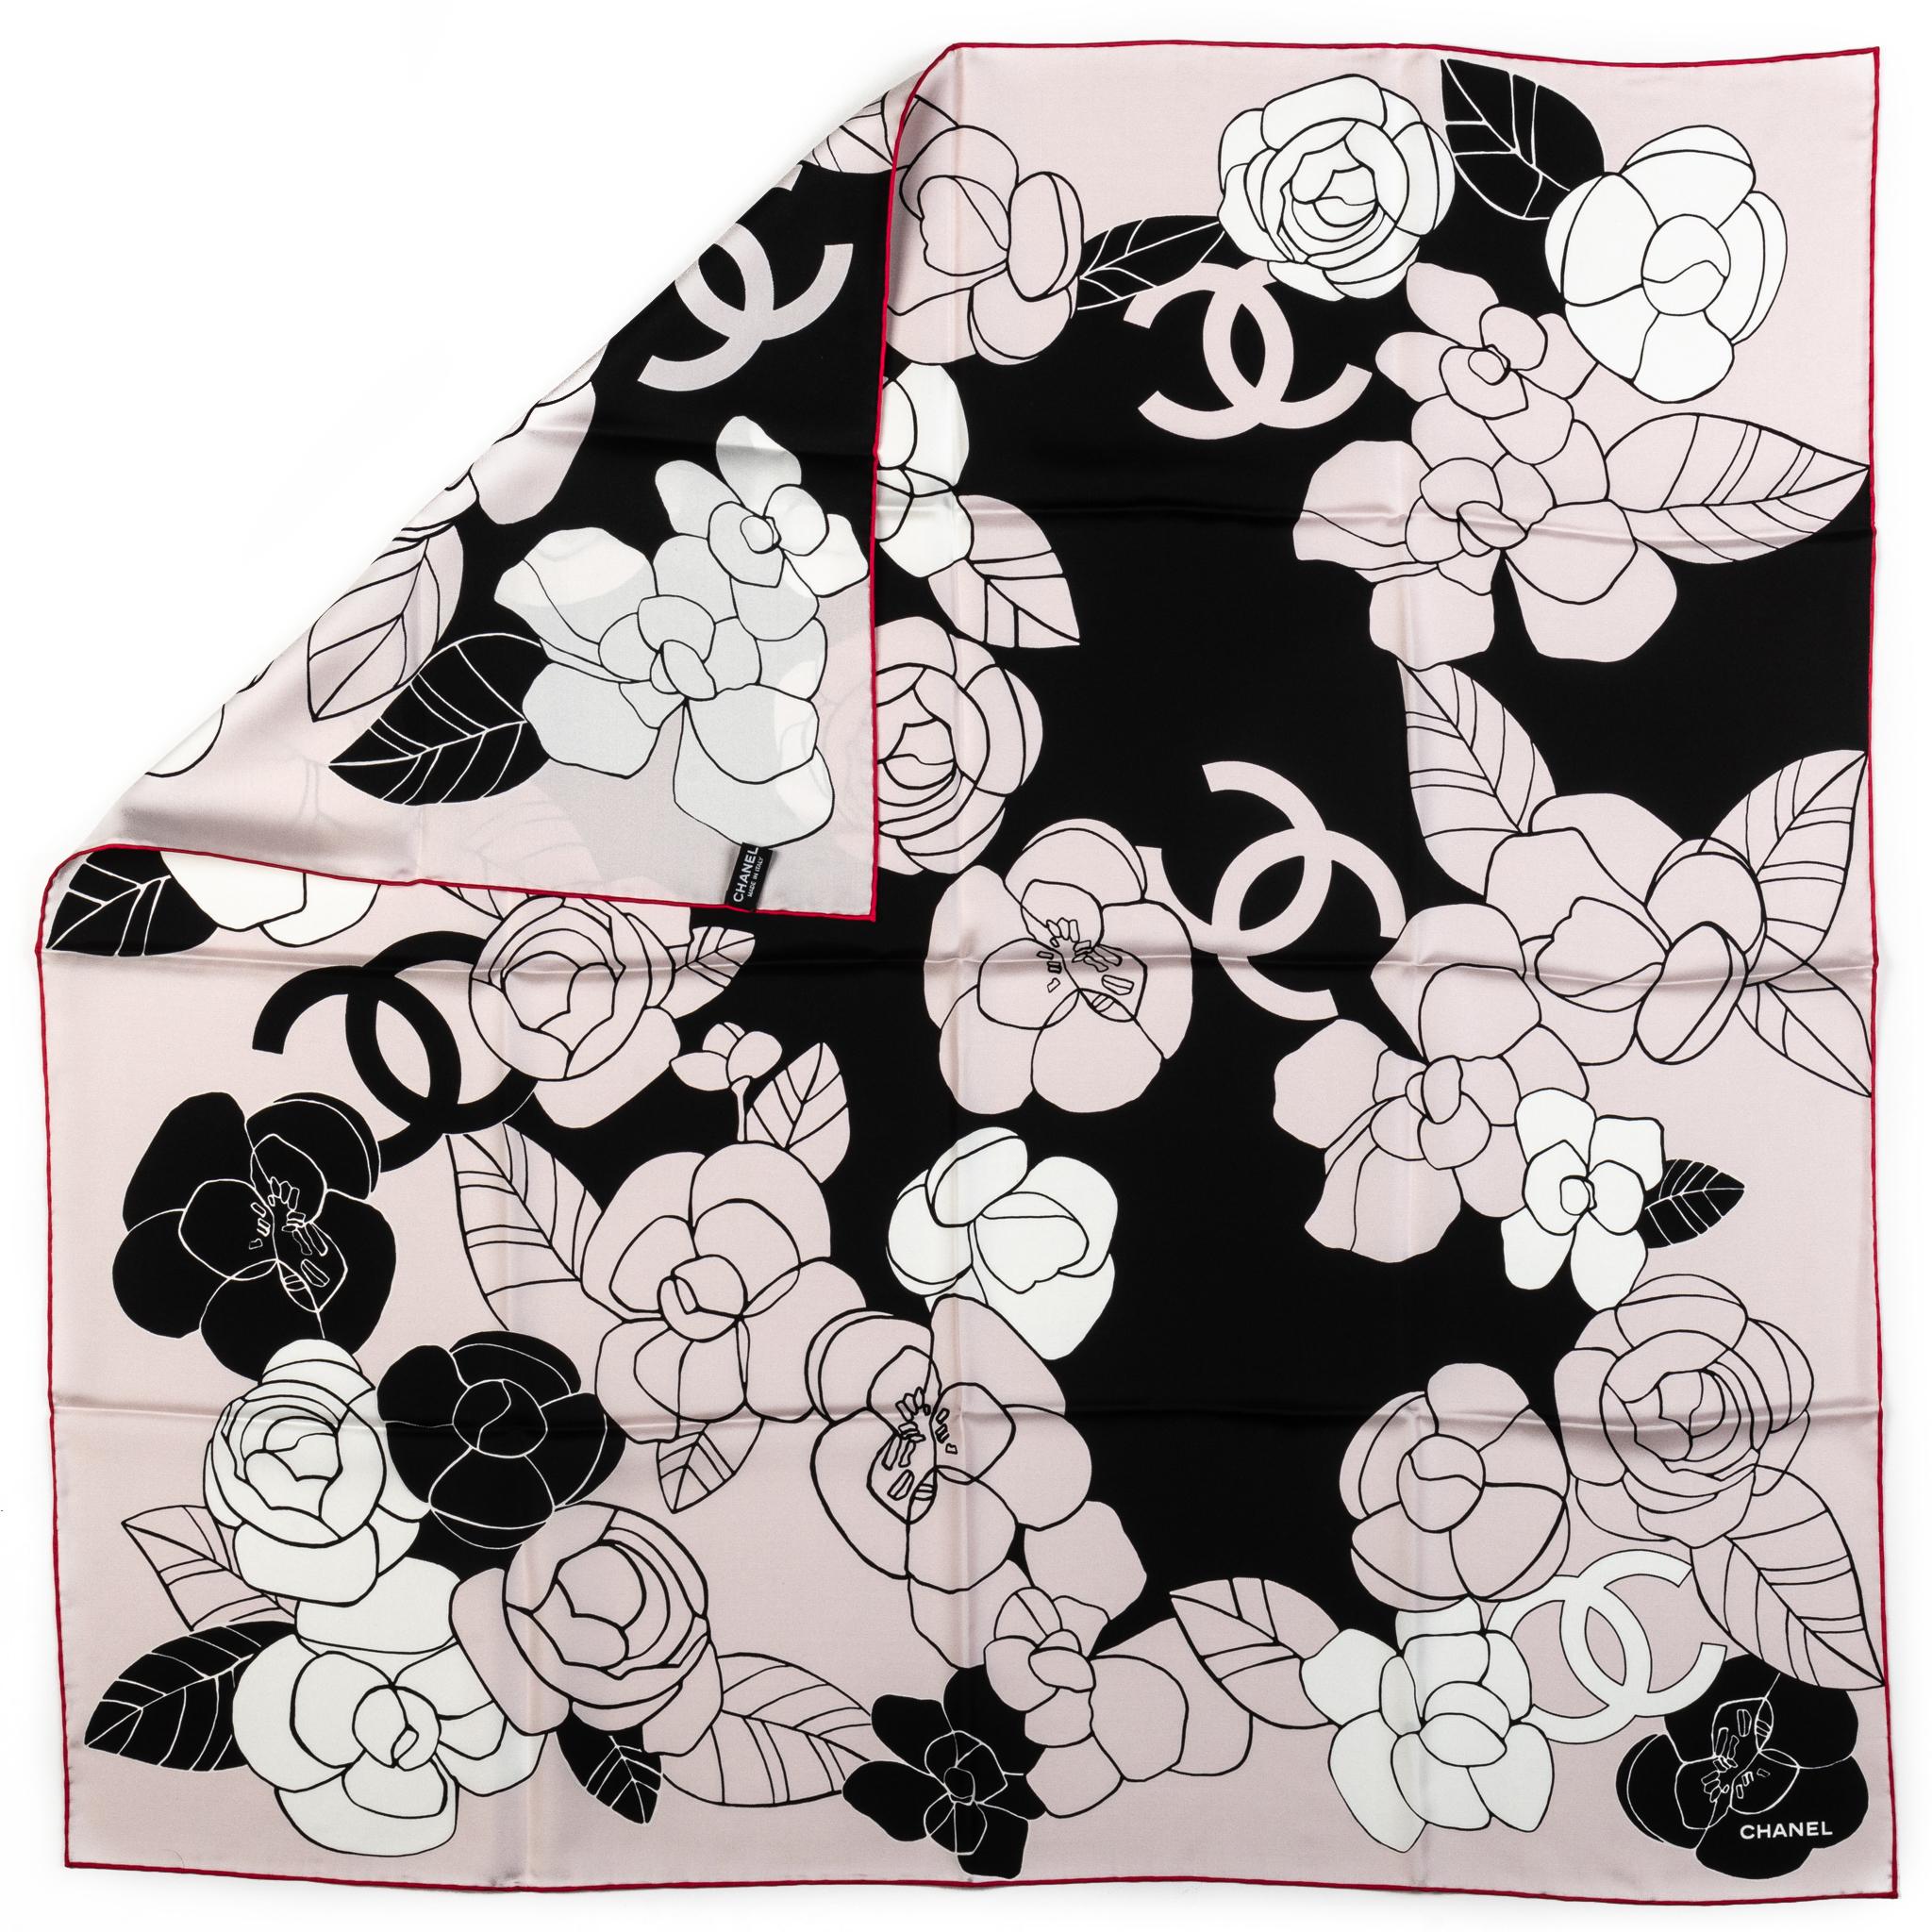 Chanel brand new camellias design 100% silk scarf in cream and black combination . Hand rolled edges. Care tag.